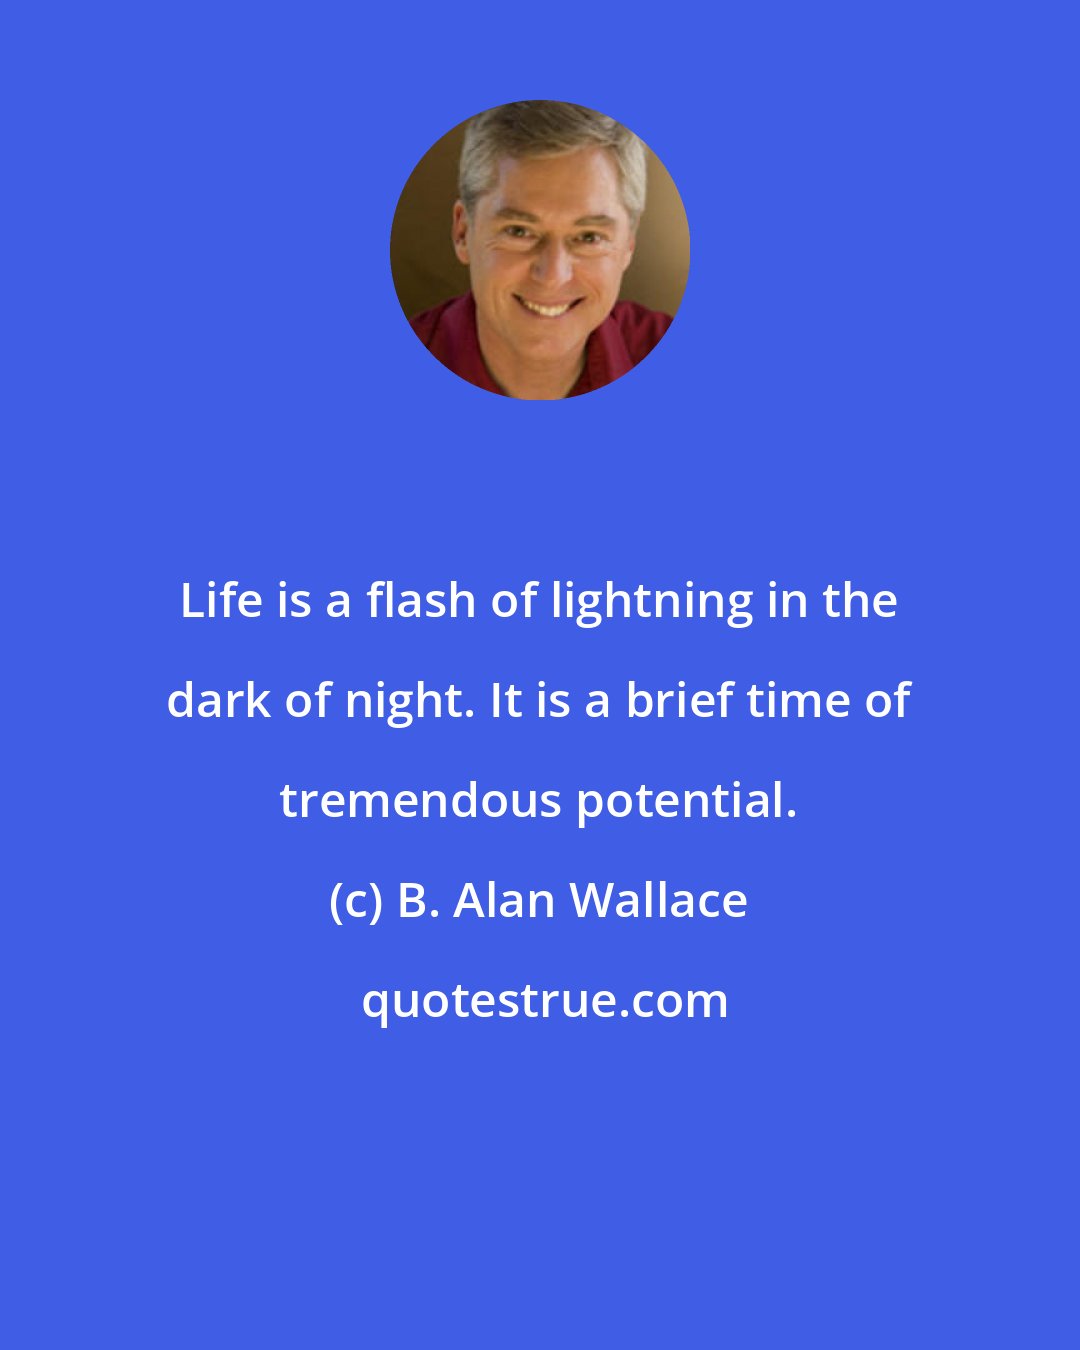 B. Alan Wallace: Life is a flash of lightning in the dark of night. It is a brief time of tremendous potential.